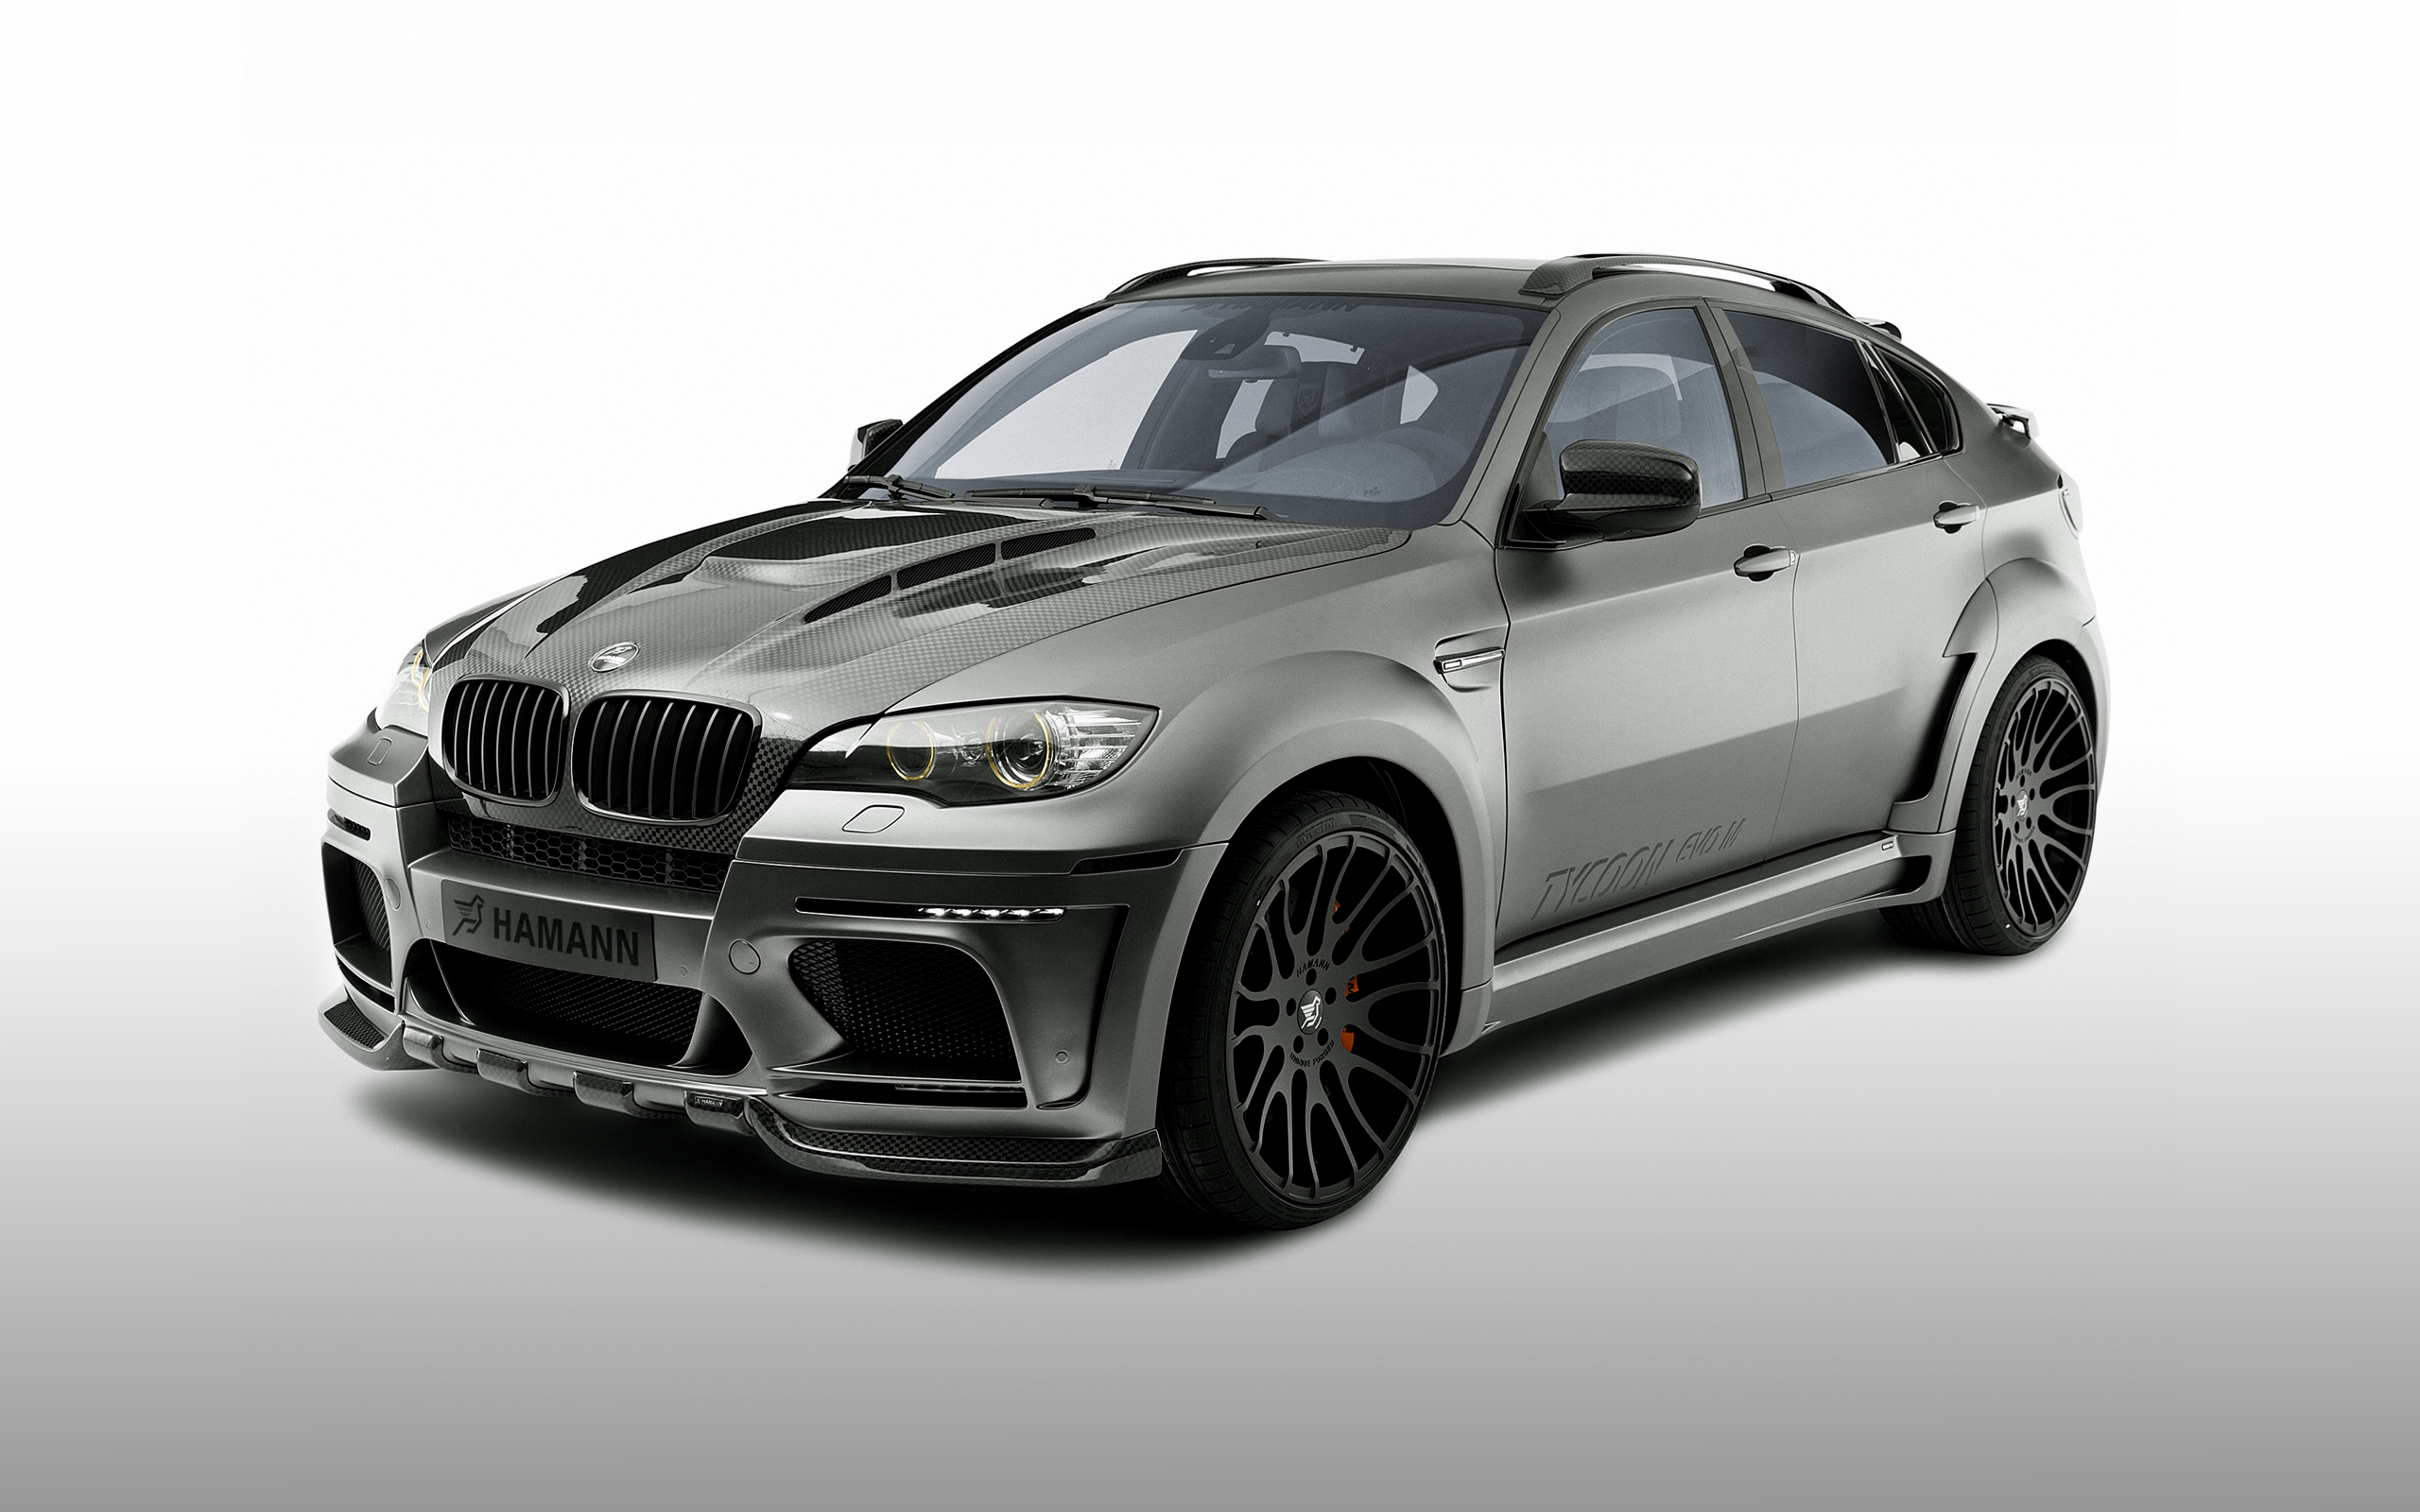 BMW X6 Wallpapers, Pictures, Images